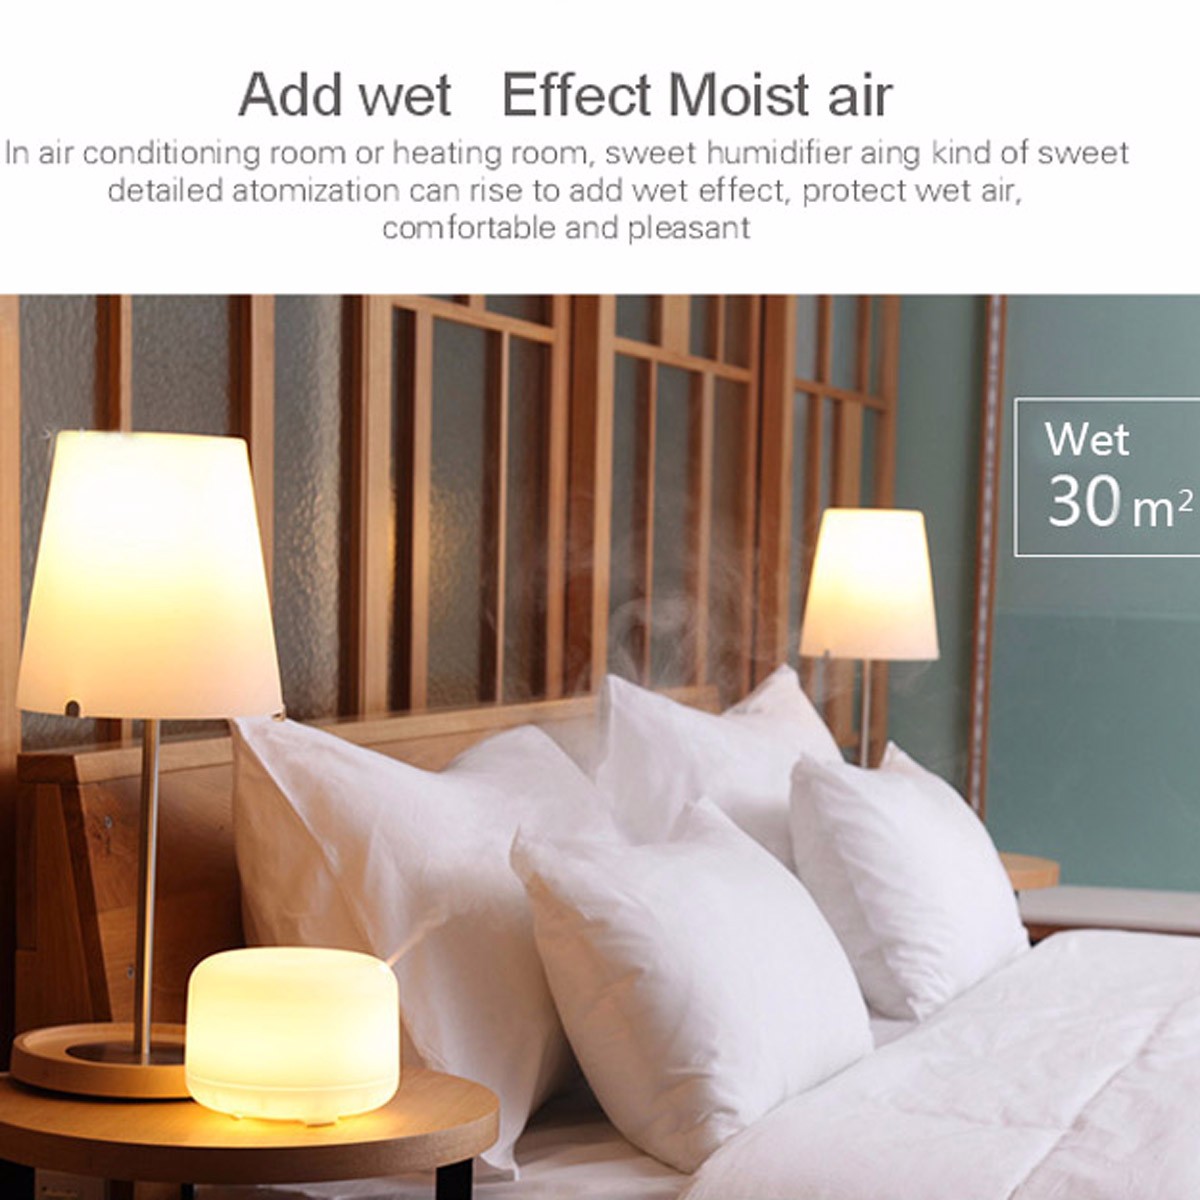 ELEGIANT-300ml-Air-Humidifier-Purifier-Ultrasonic-Essential-Oil-Diffuser-Cool-Mist-7-Color-LED-Light-1379720-2